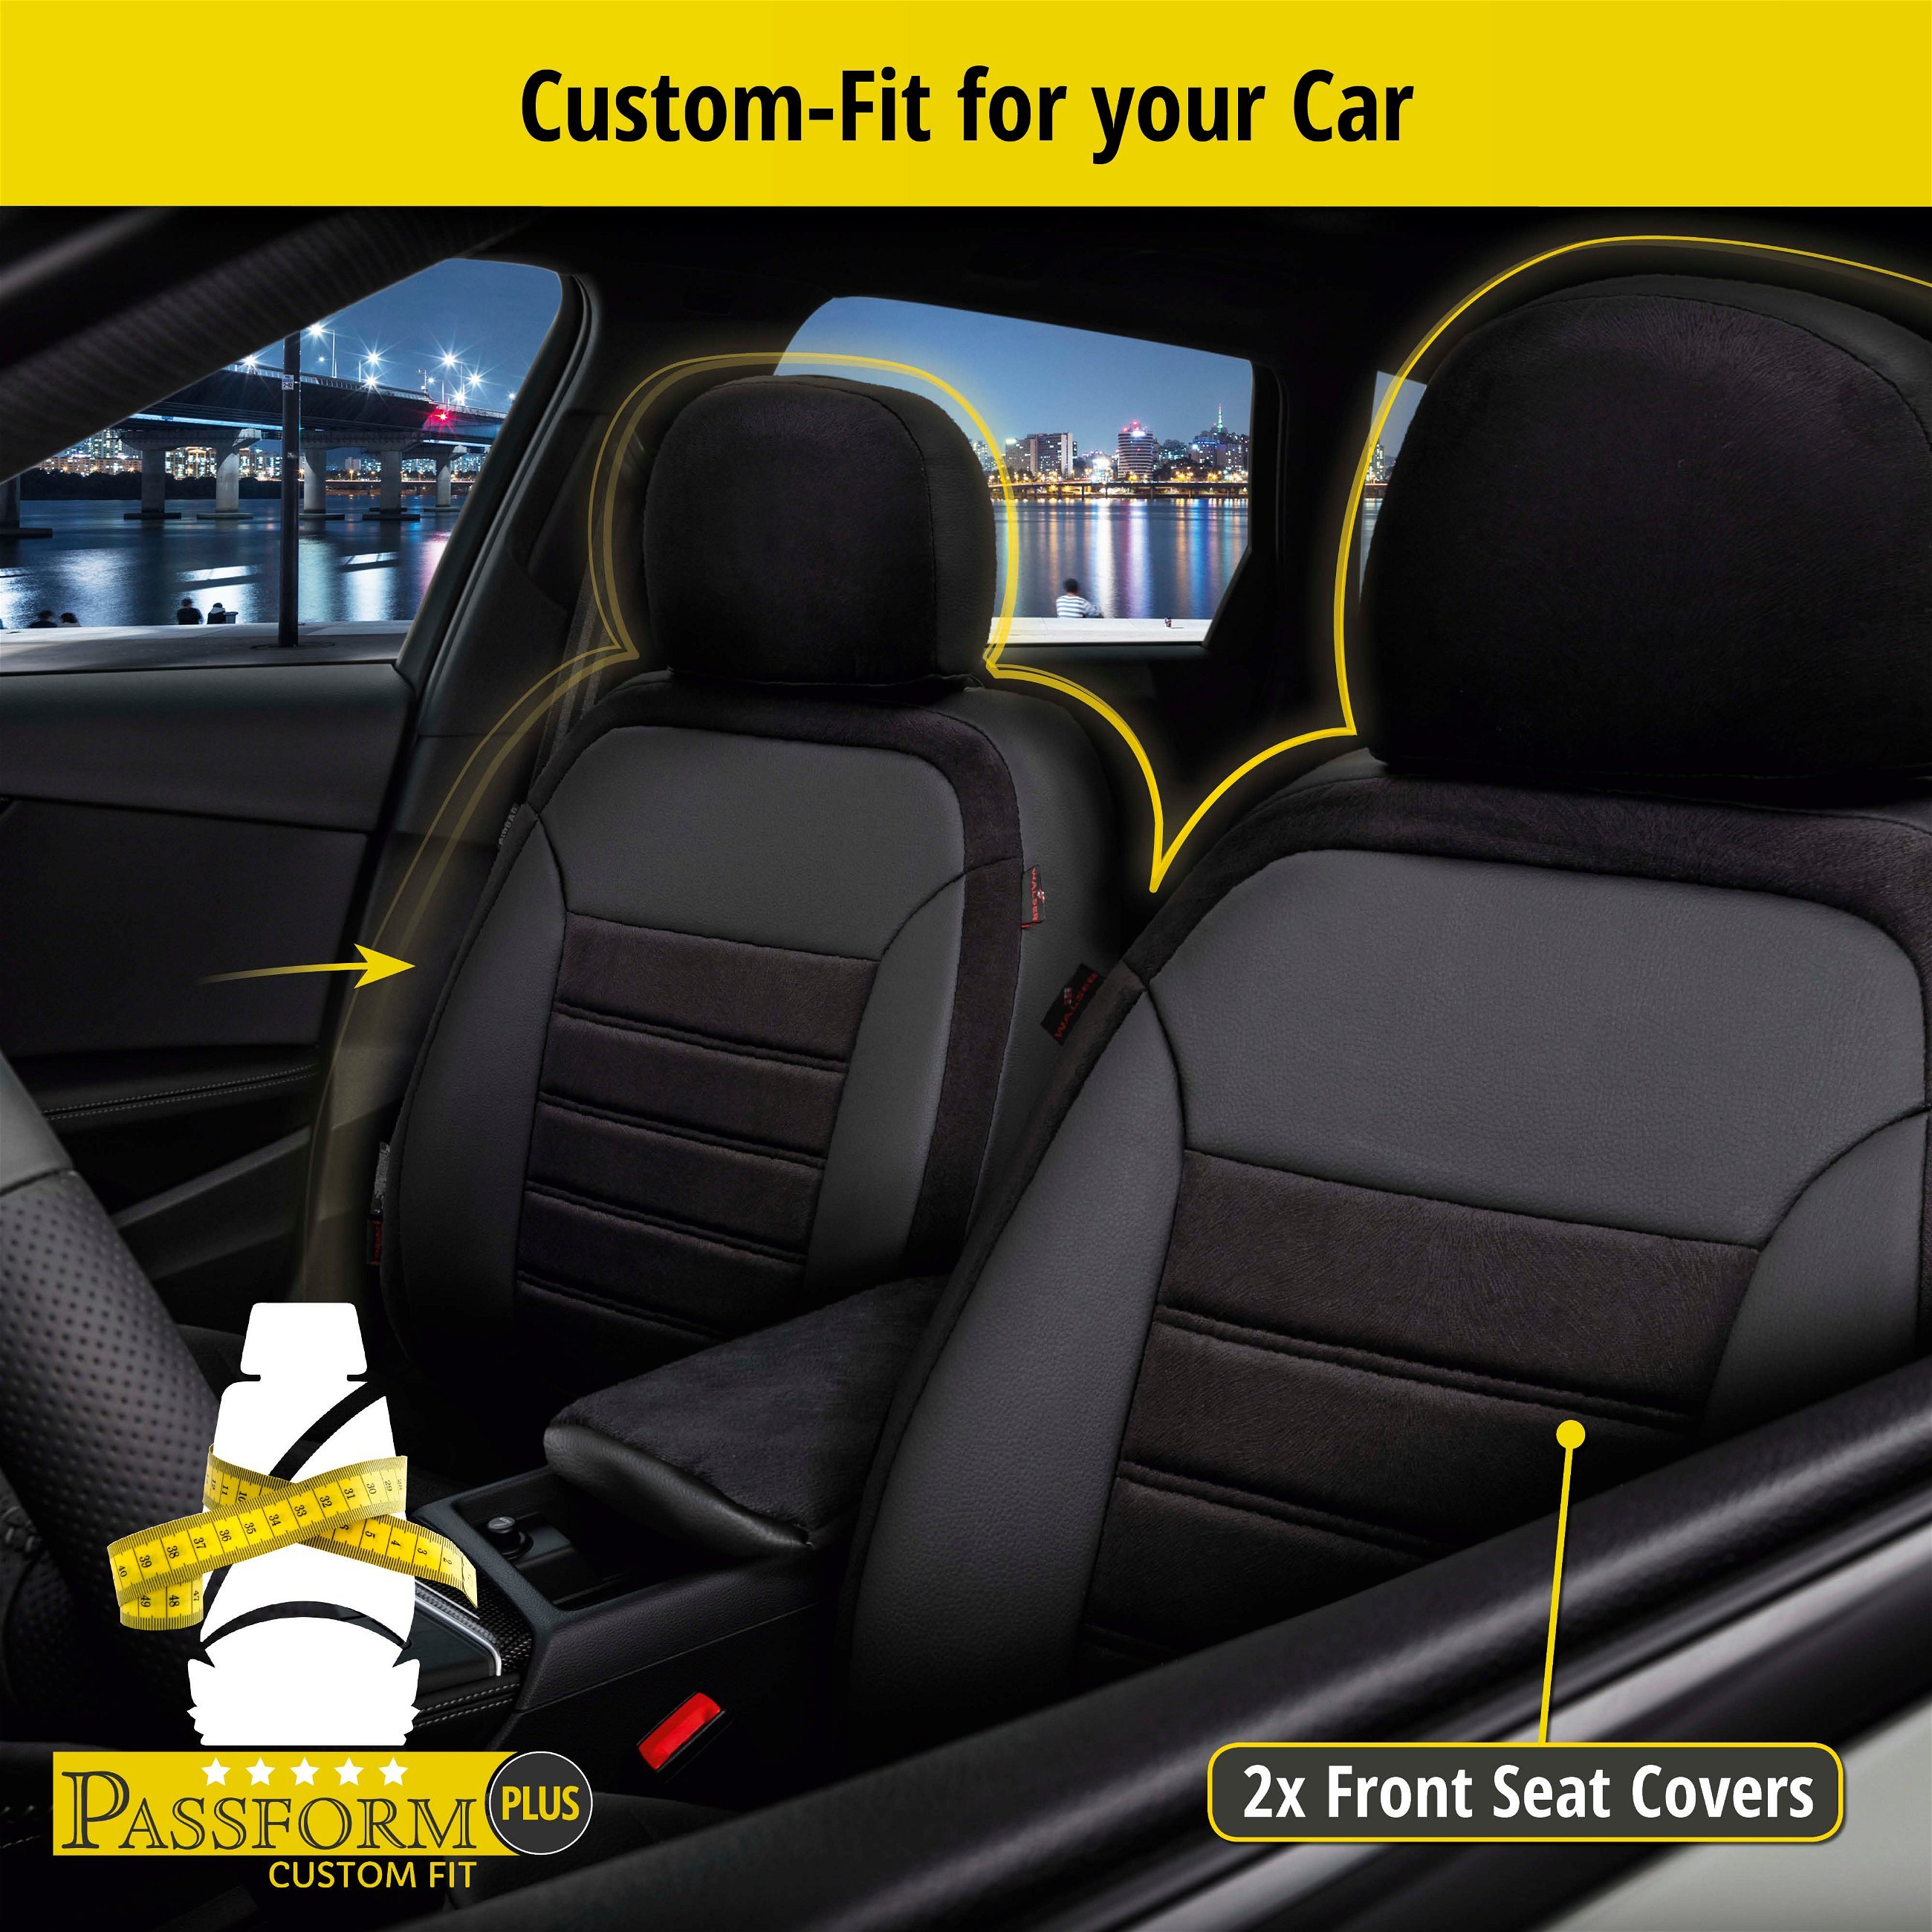 Seat Cover Bari for Opel Insignia A SportsTourer 07/2008-03/2017, 2 seat covers for normal seats